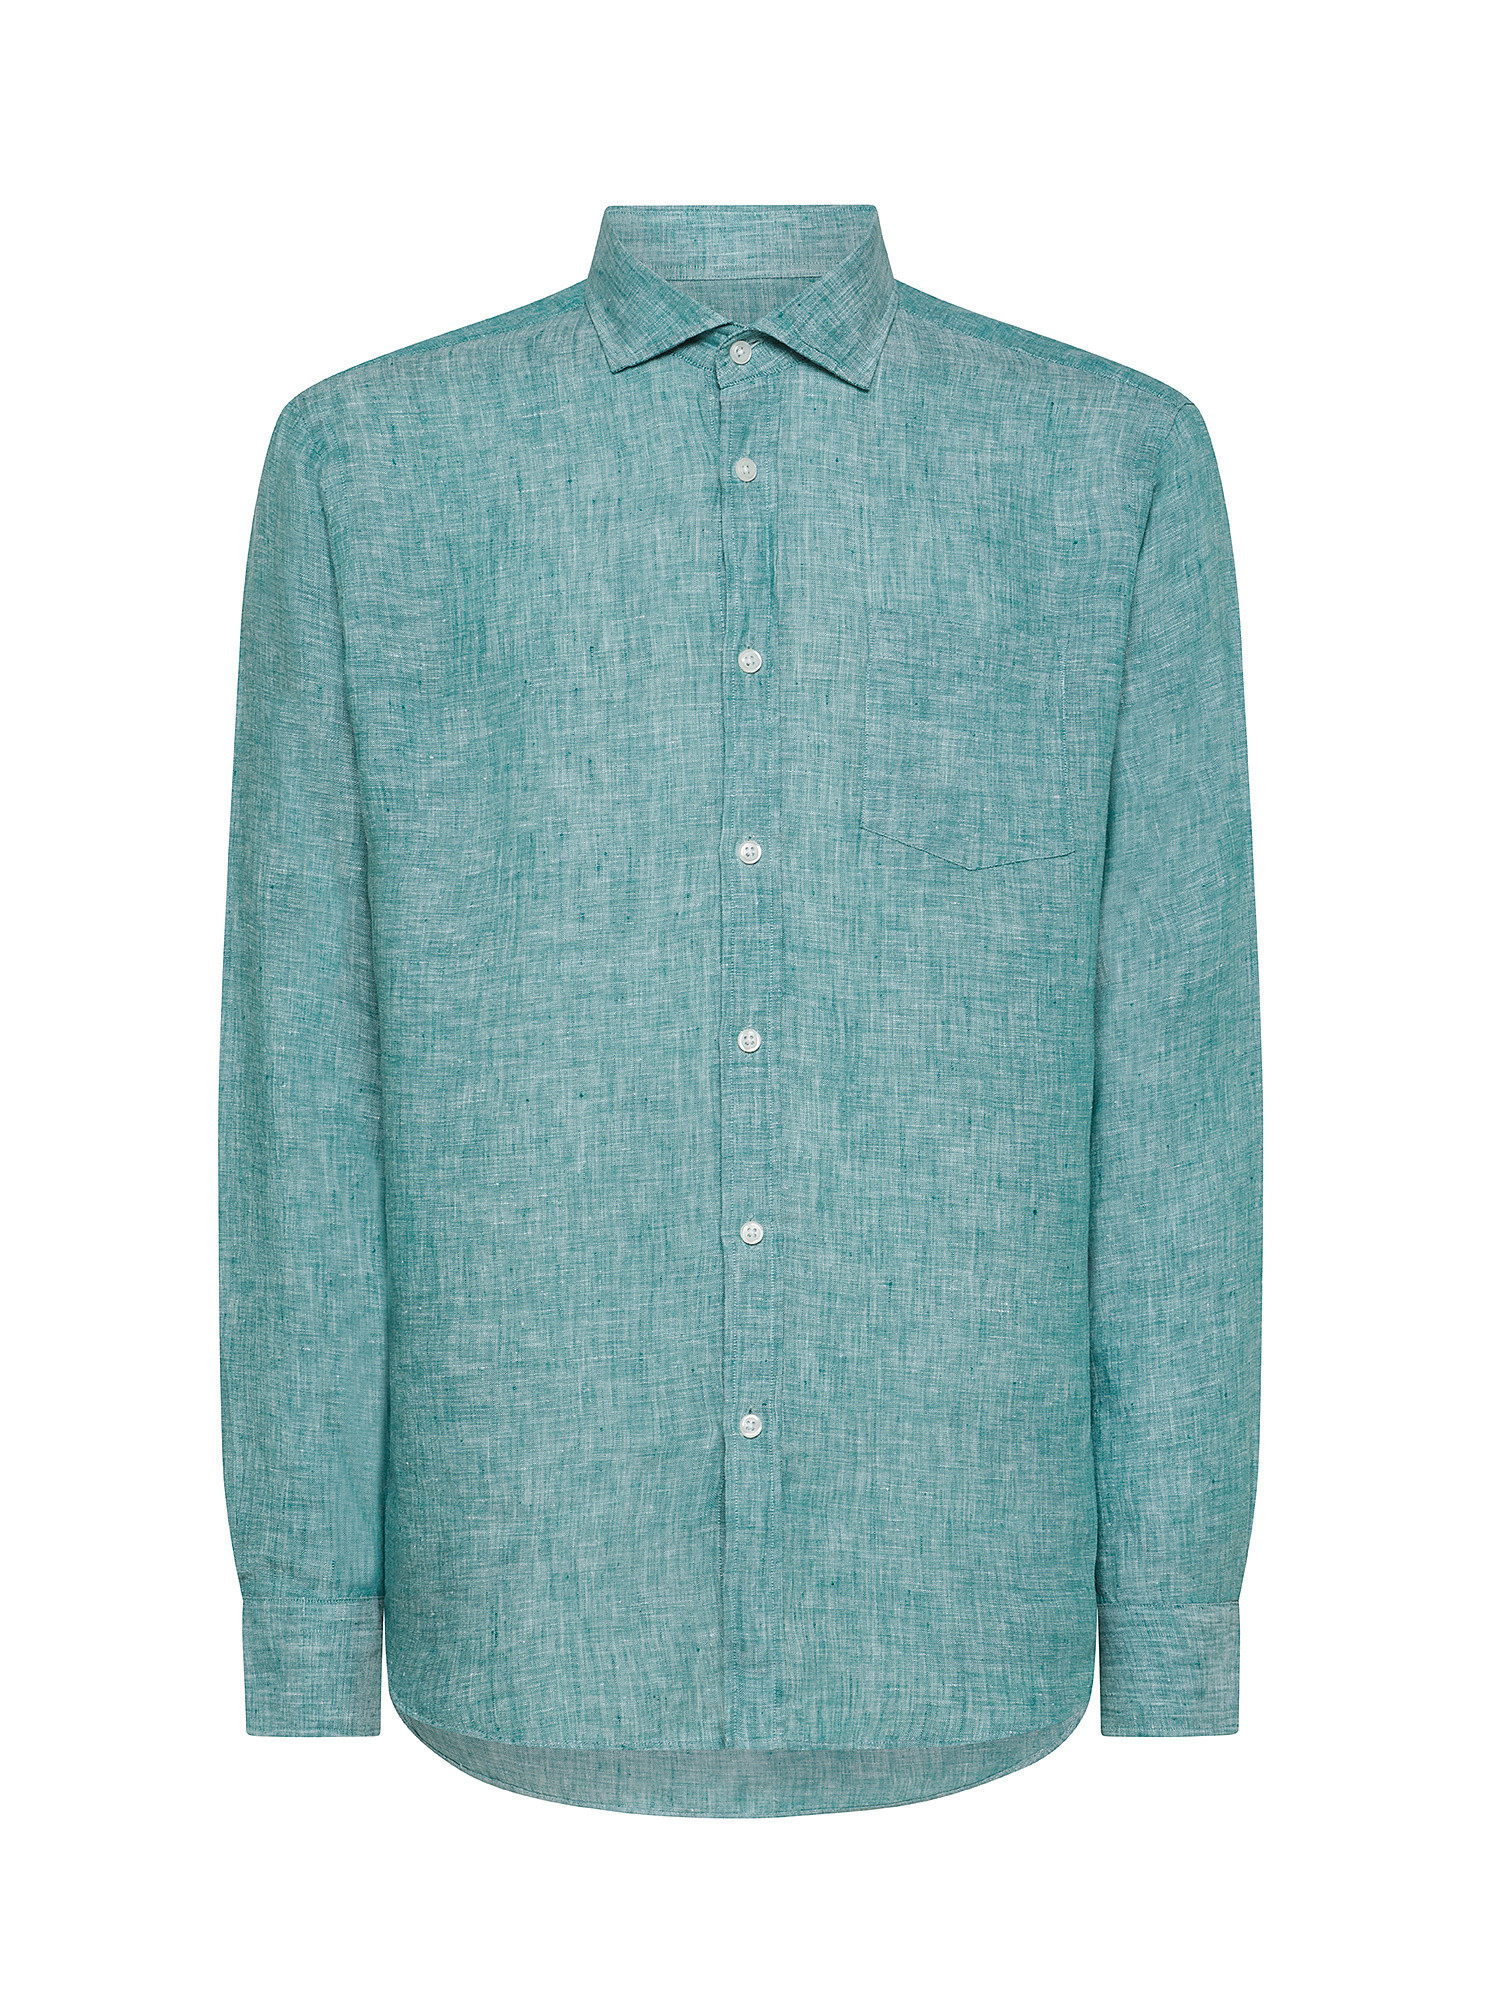 Luca D'Altieri - Tailor fit shirt in pure linen, Emerald, large image number 0